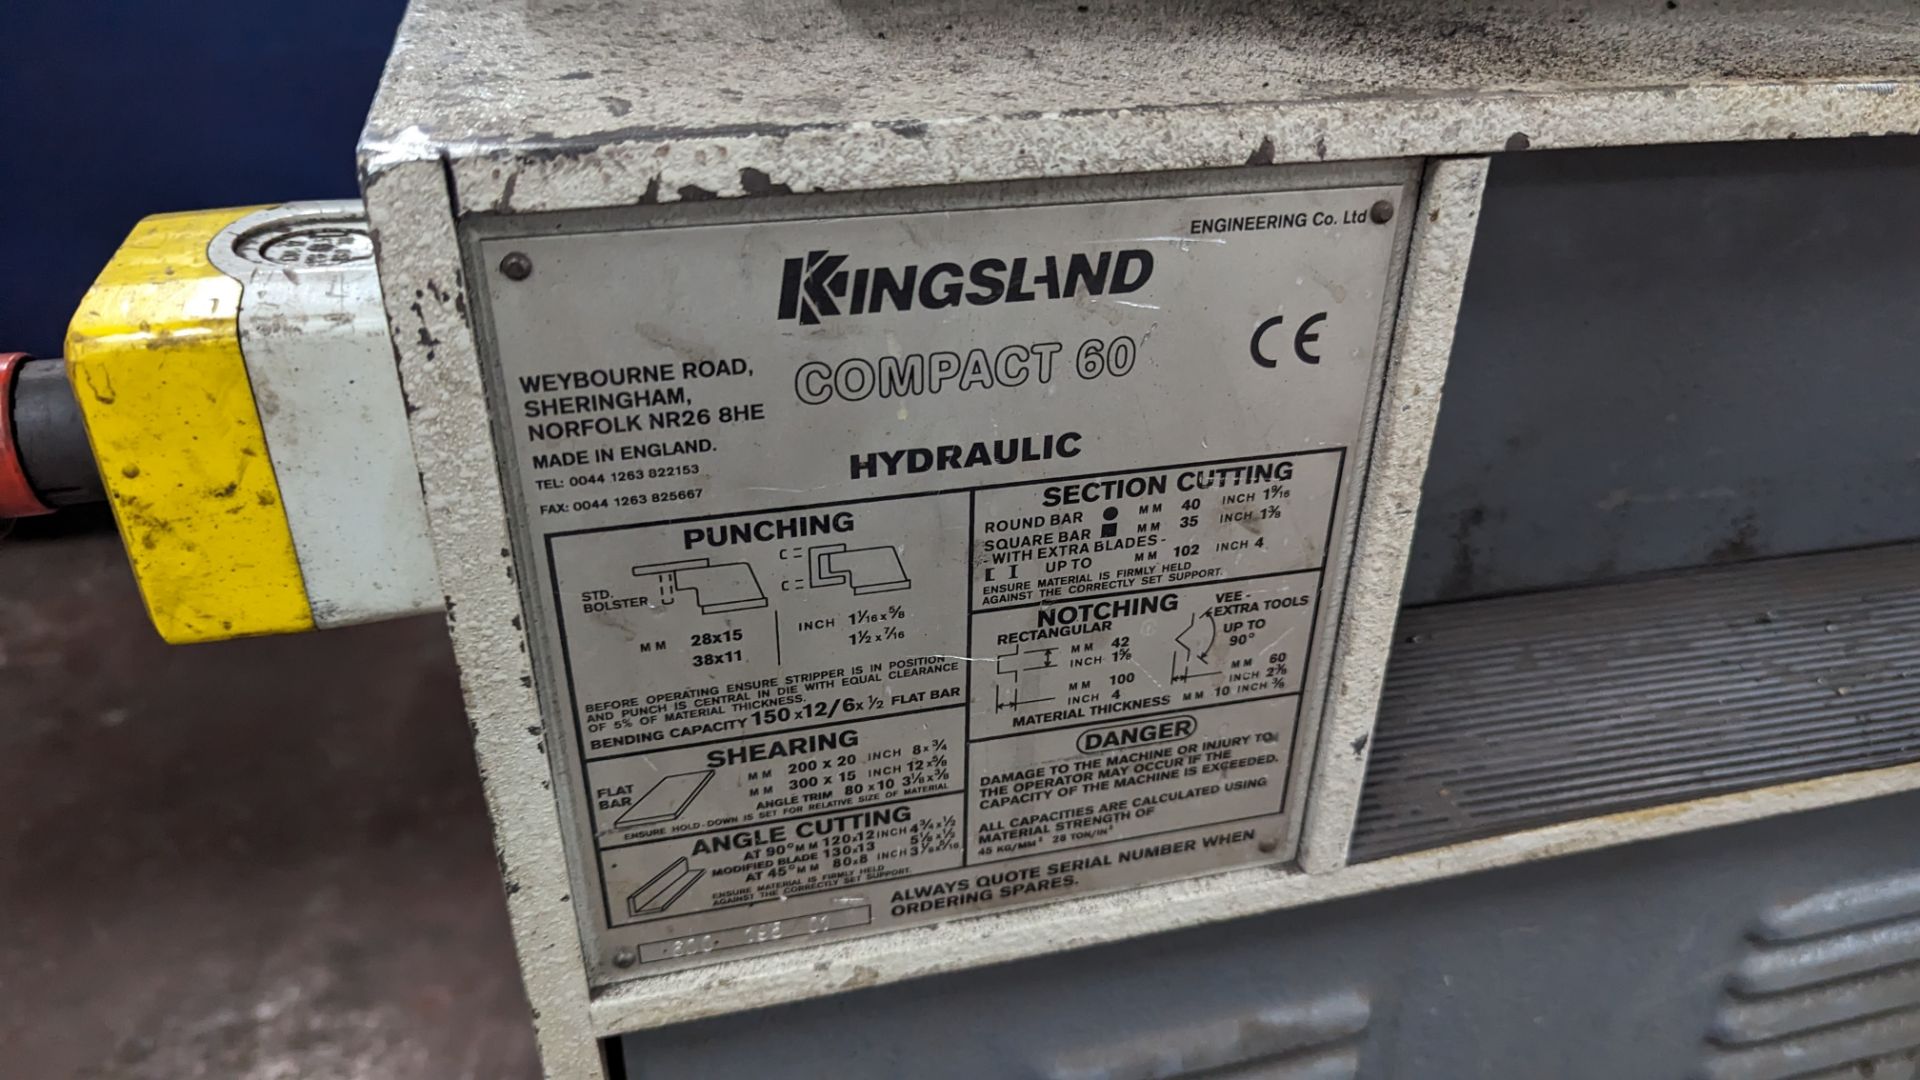 Kingsland Compact 60 hydraulic metalworker for punching, shearing, angle cutting, section cutting an - Image 6 of 22